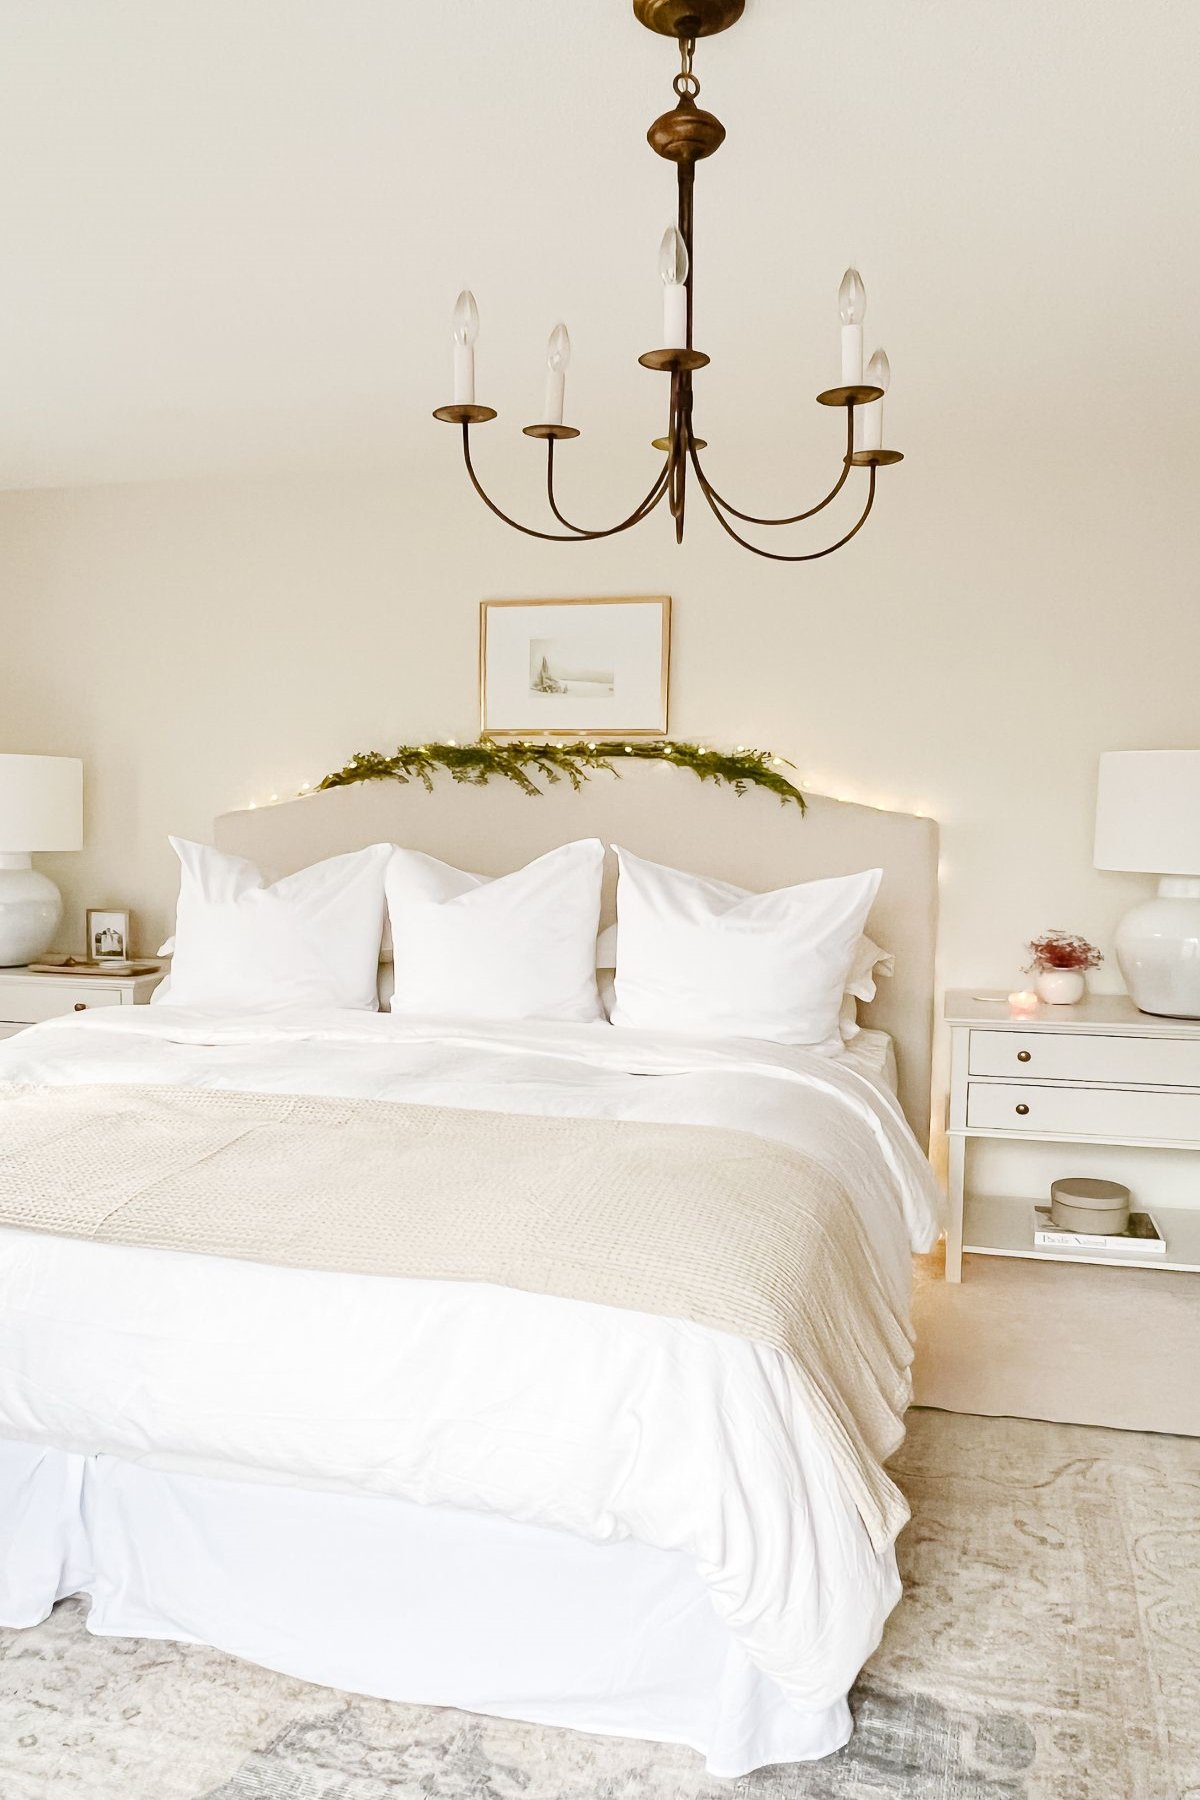 A bedroom decorated with a minimalist Christmas style with a faux greenery garland over the headboard